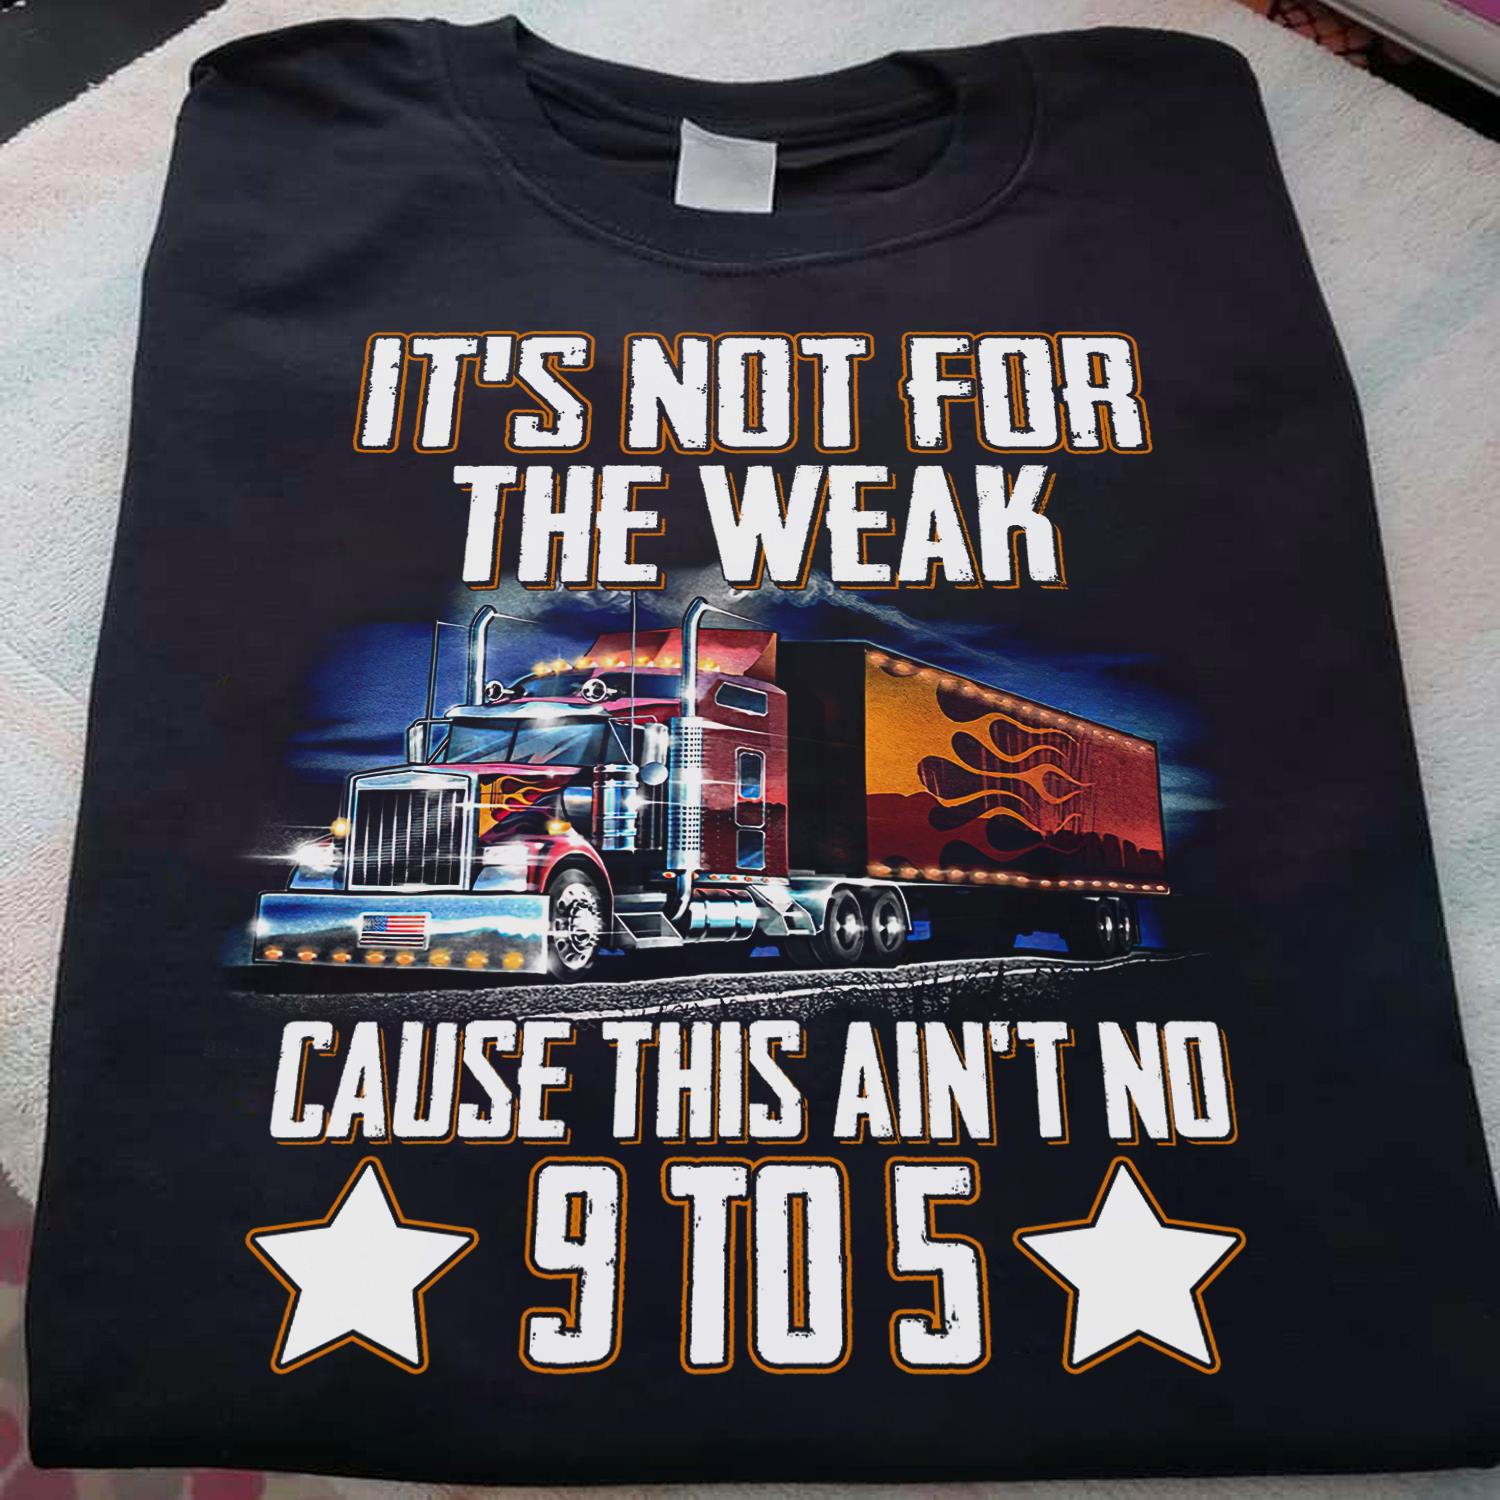 It's not for the weak cause this ain't no 9 to 5 - The trucker